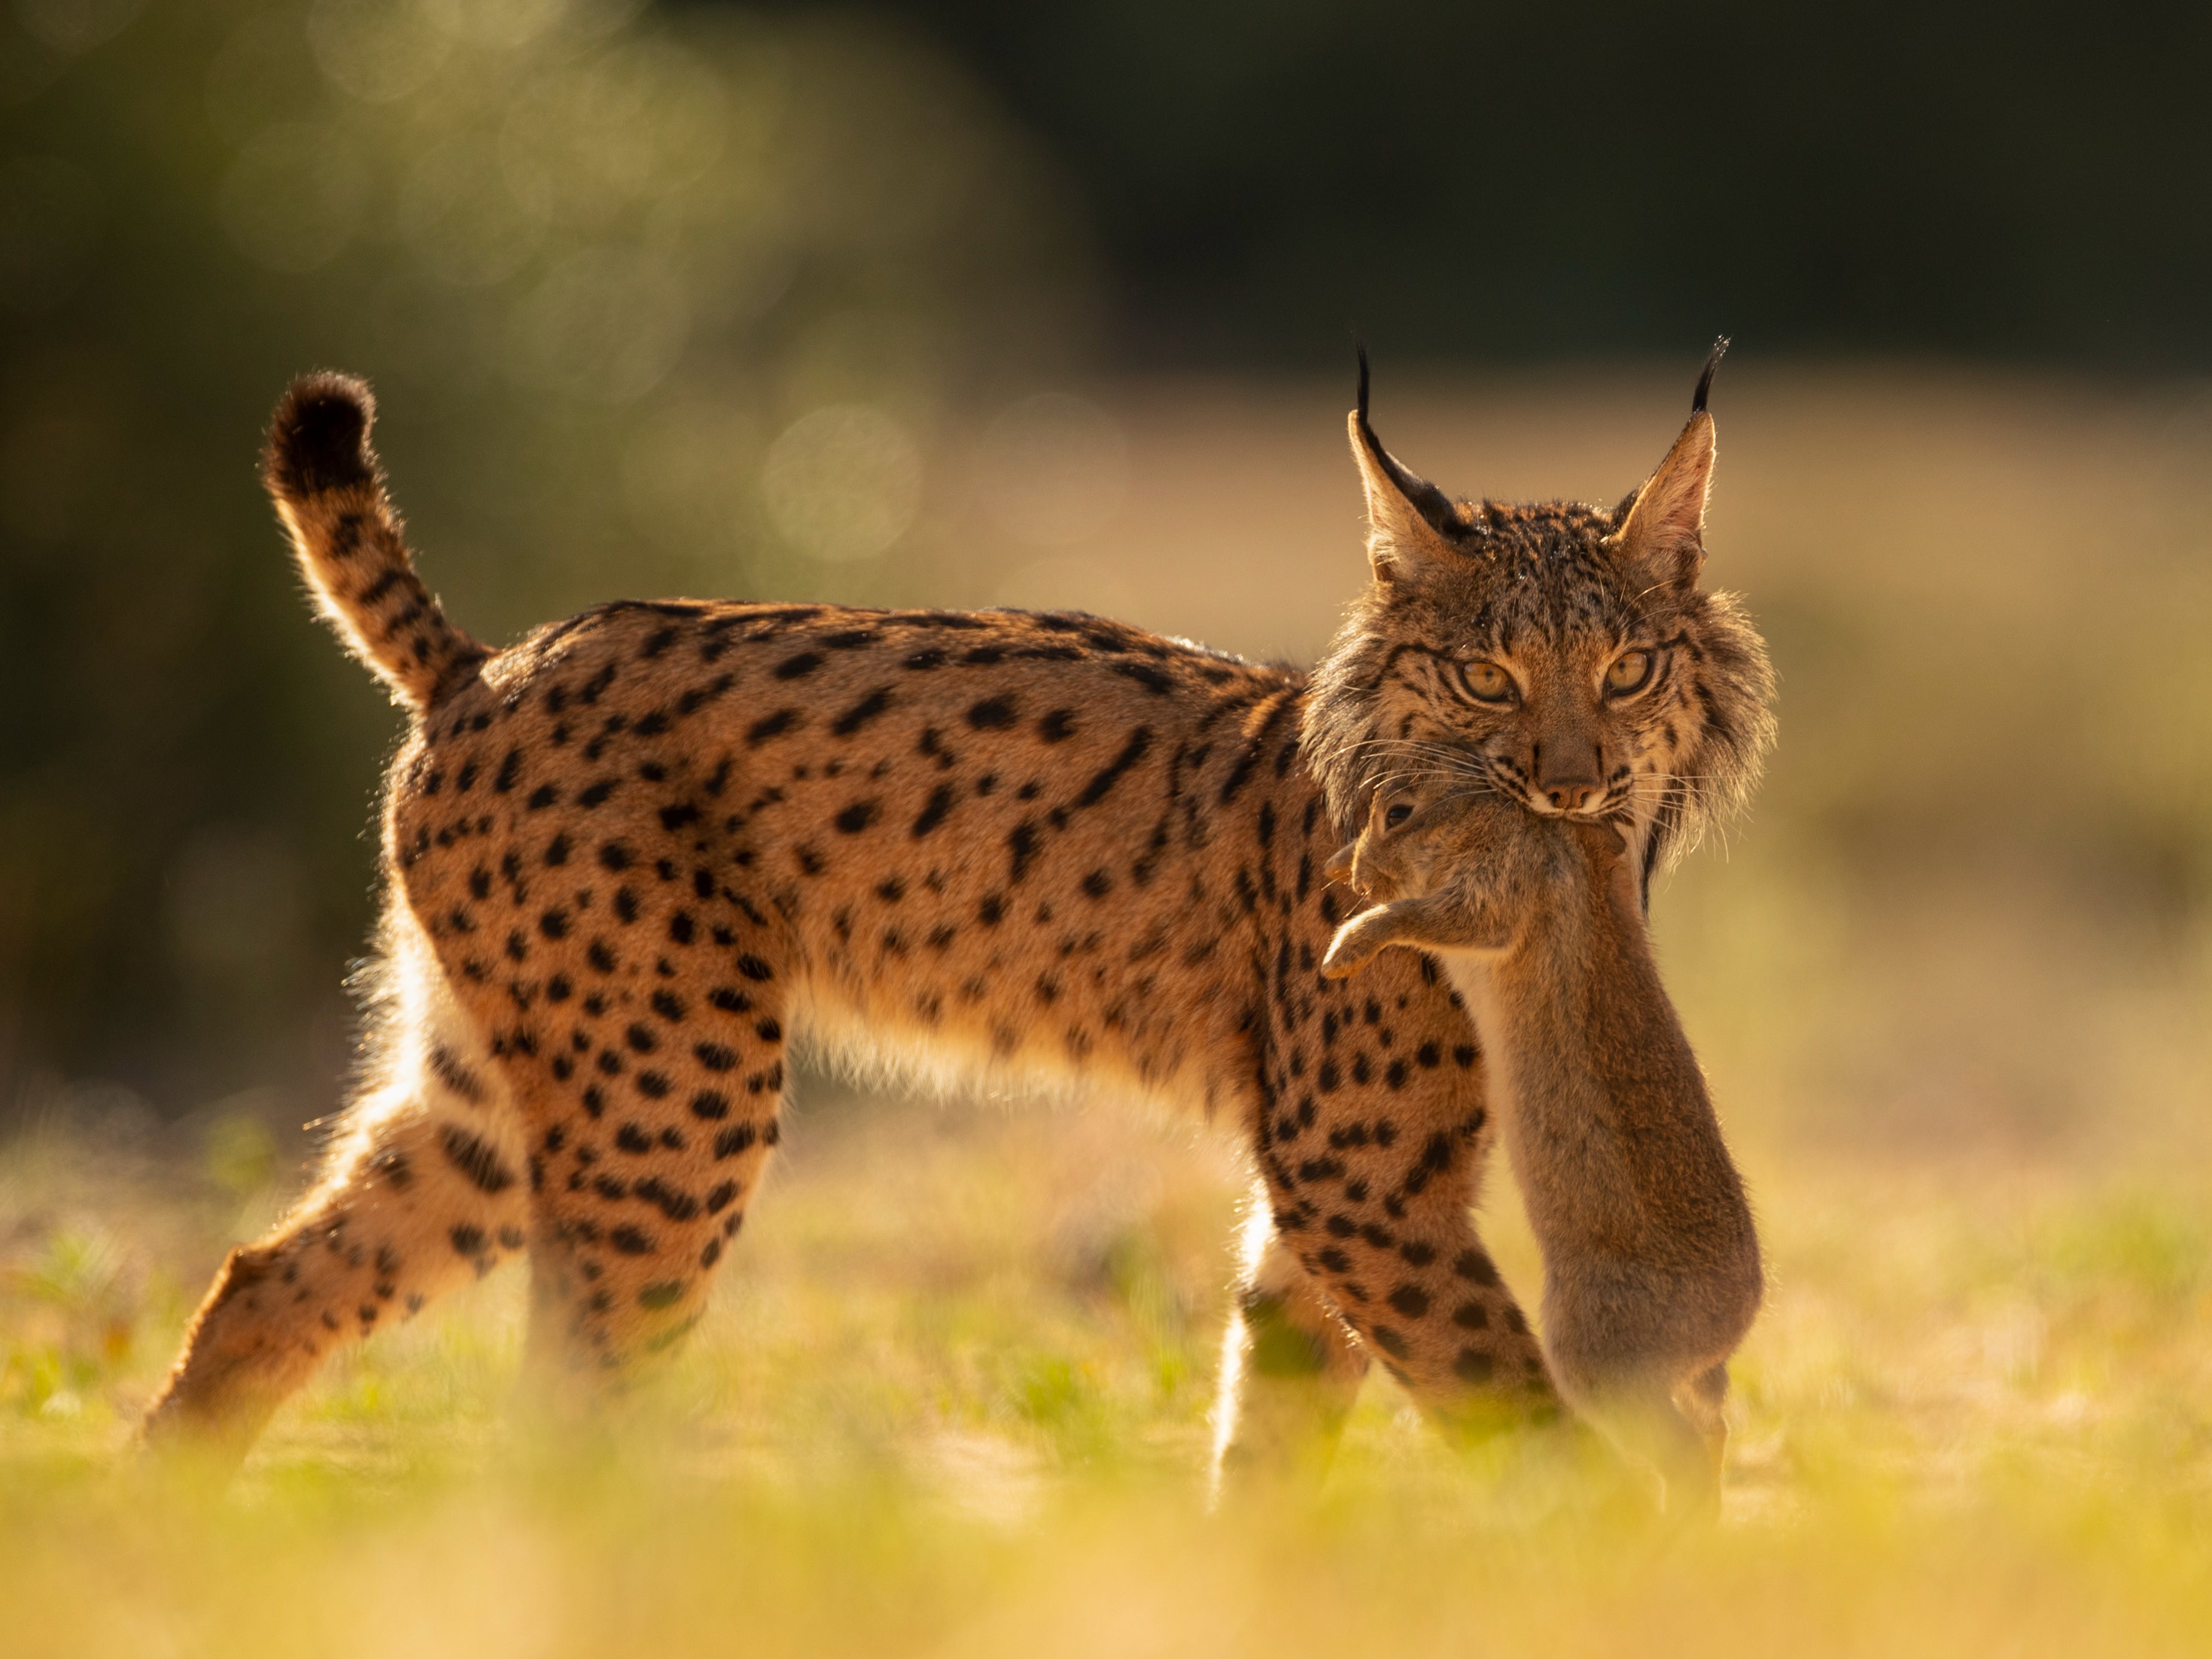 An Iberian lynx walks with a rabbit in its mouth after having captured it in the surroundings of the Do?ana National Park in Aznalcazar, Spain